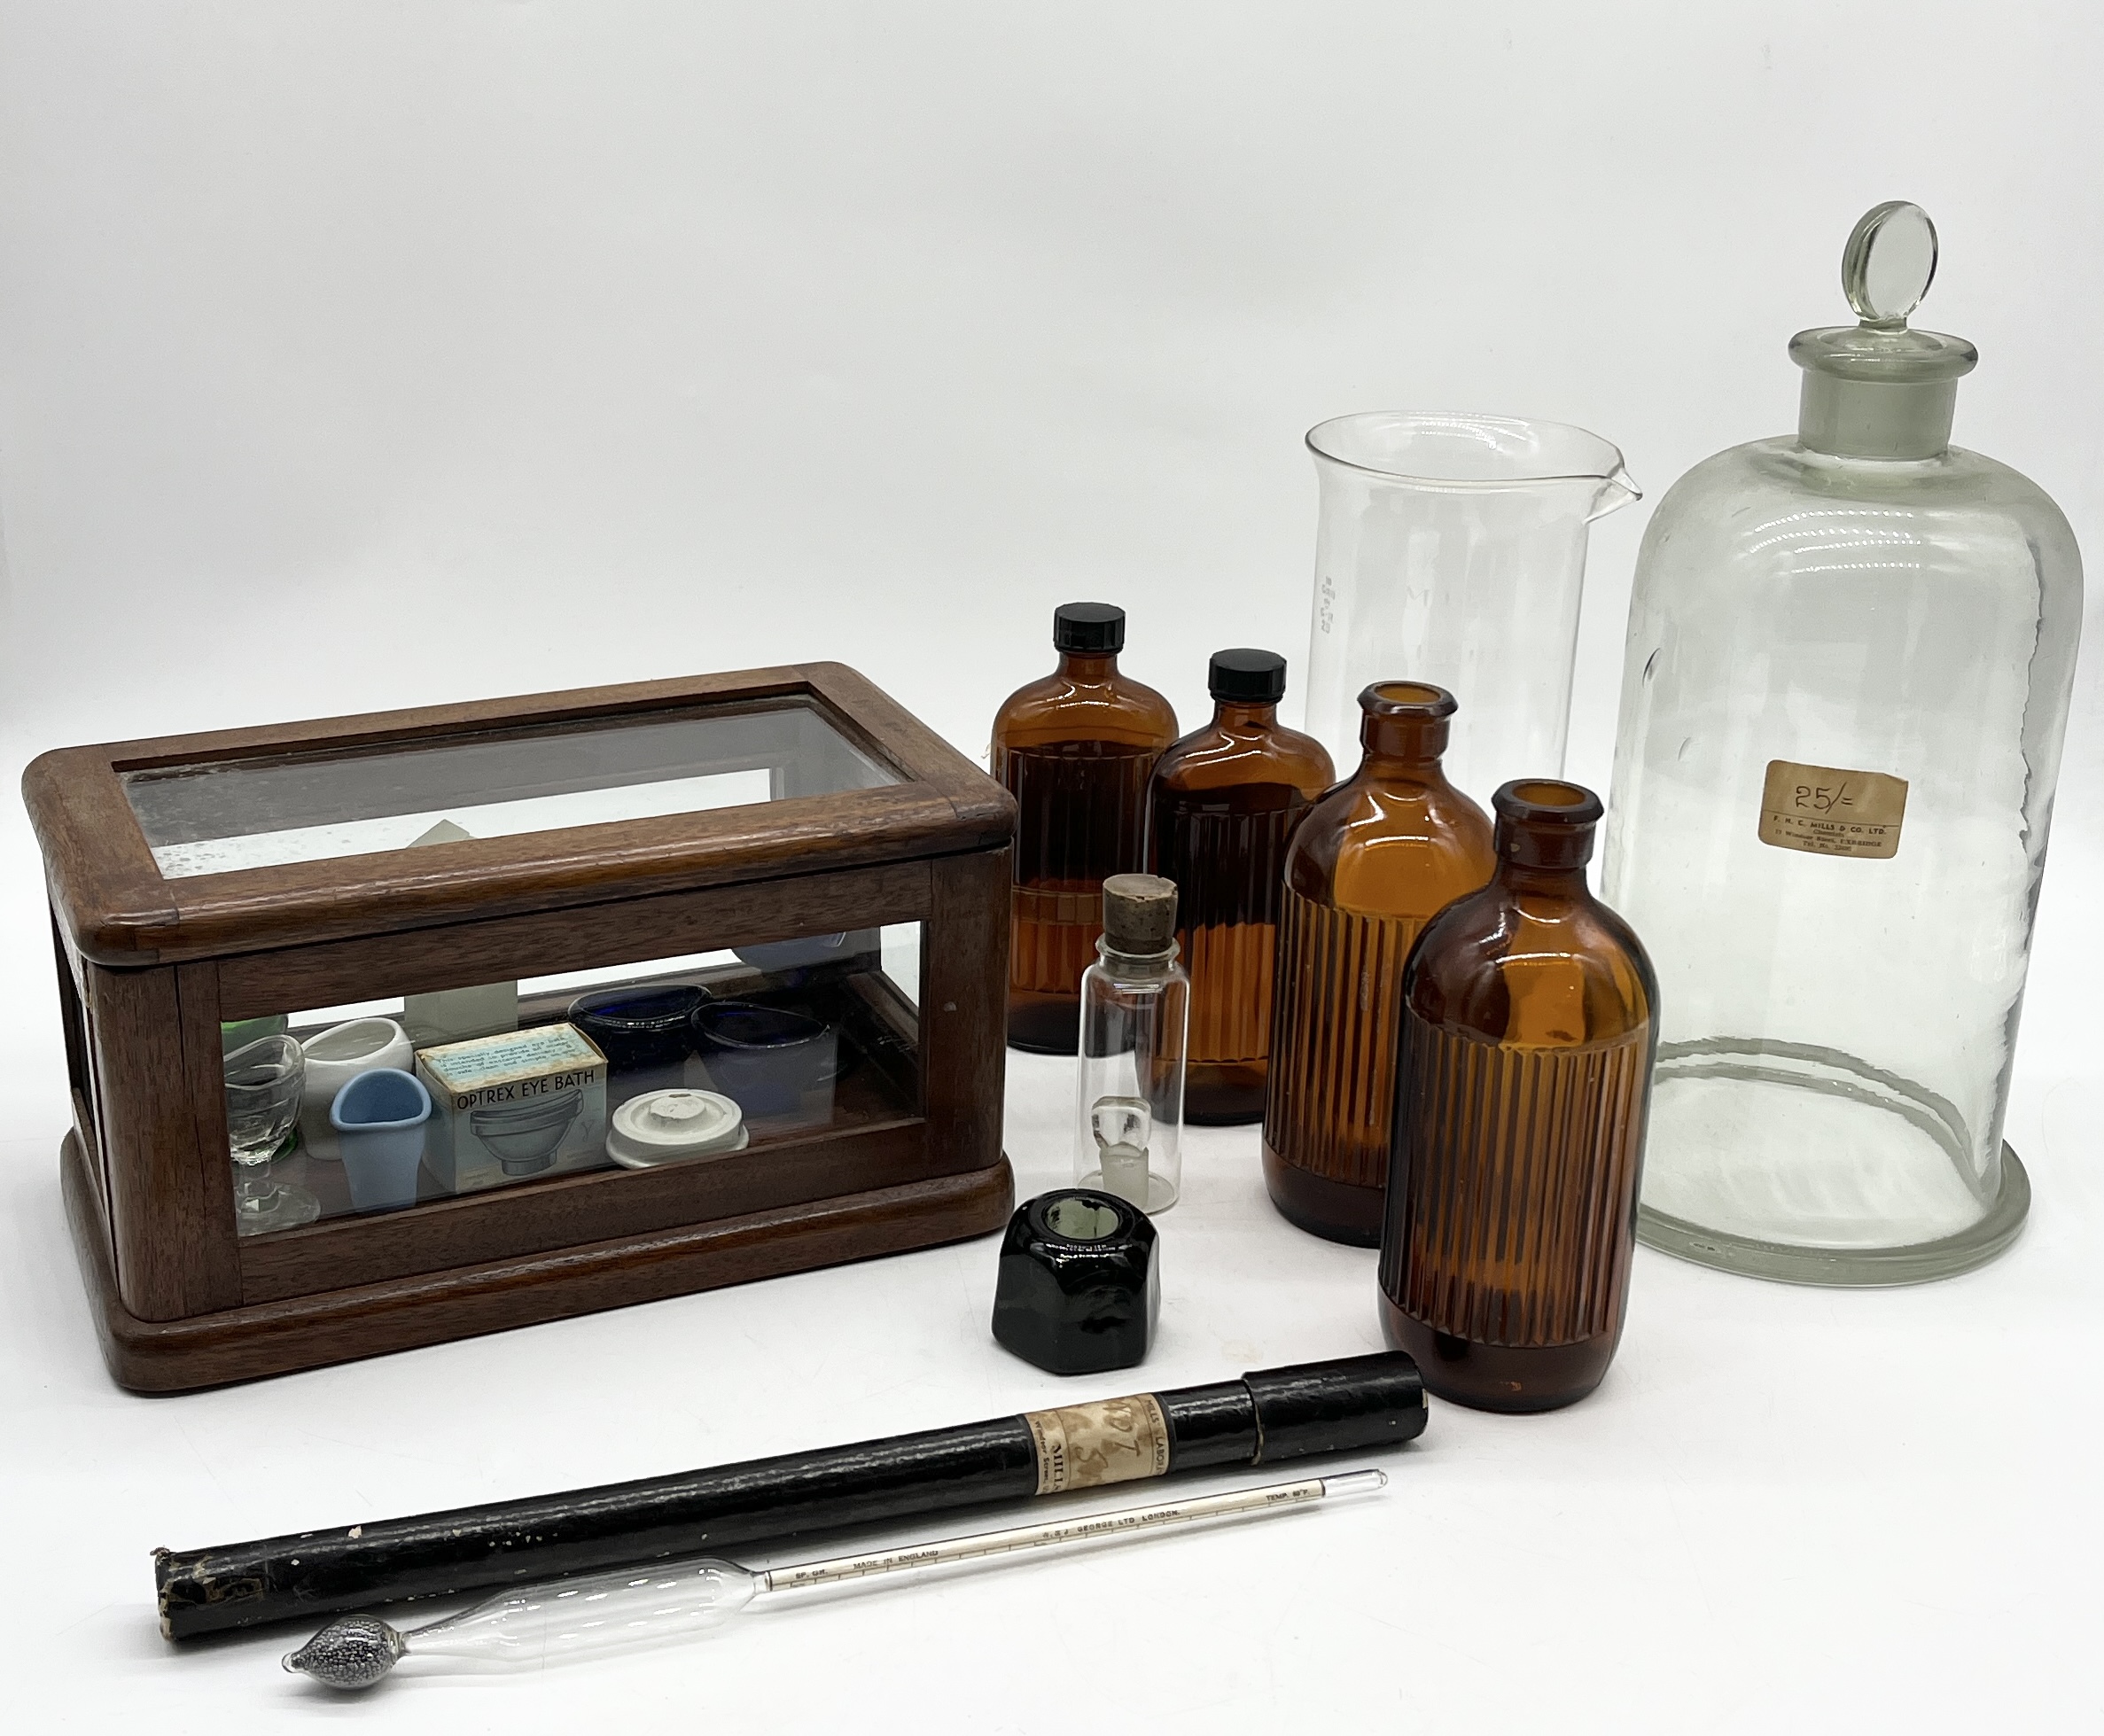 A collection of chemists bottles and bell jars along with a small wooden medical cabinet